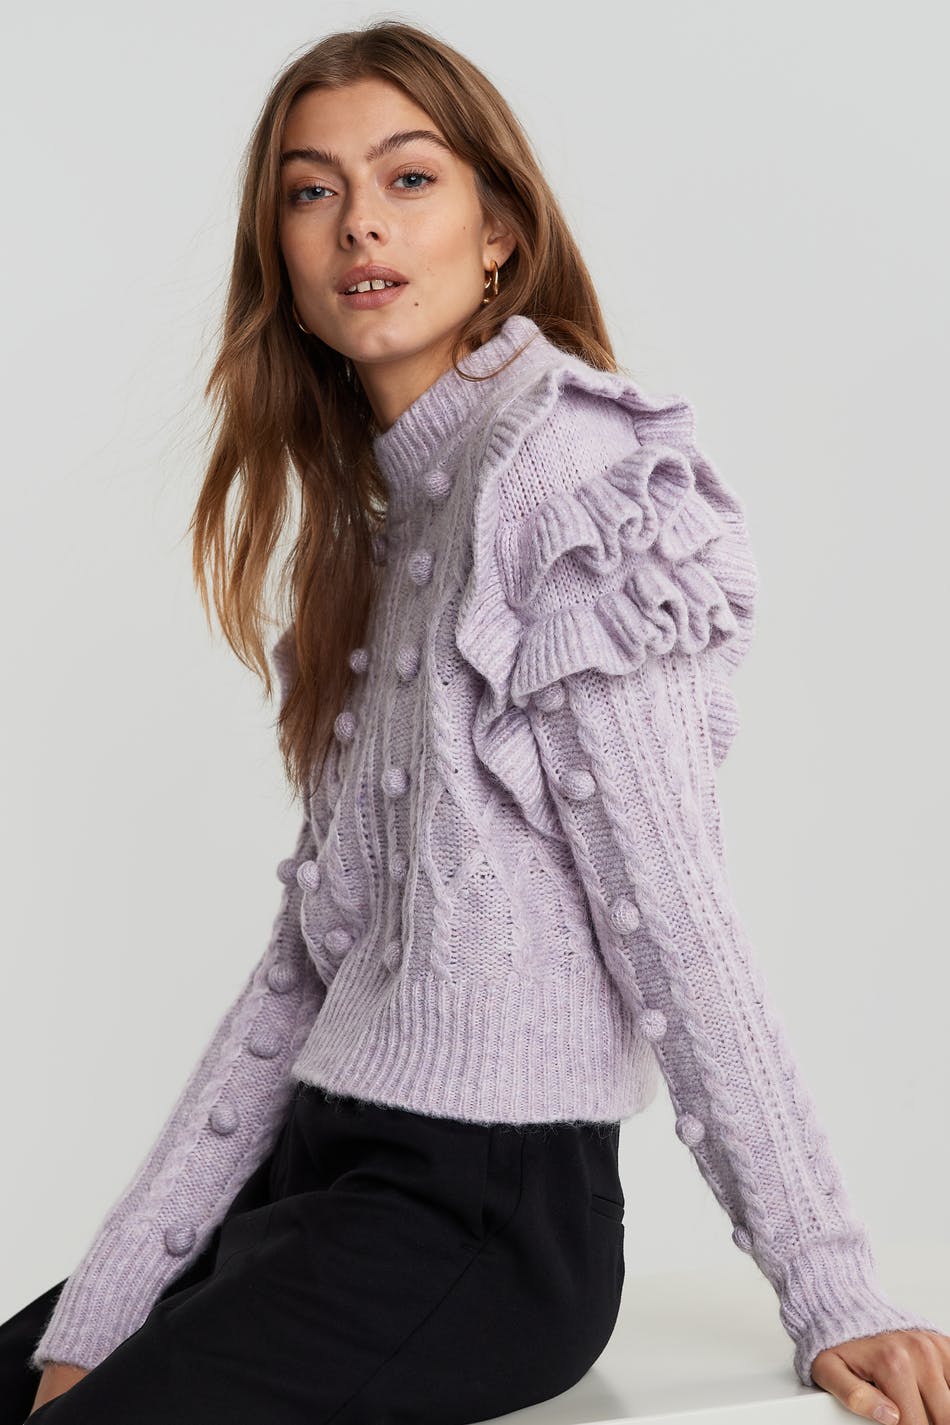 Allison knitted sweater - knittedsweaters Gina